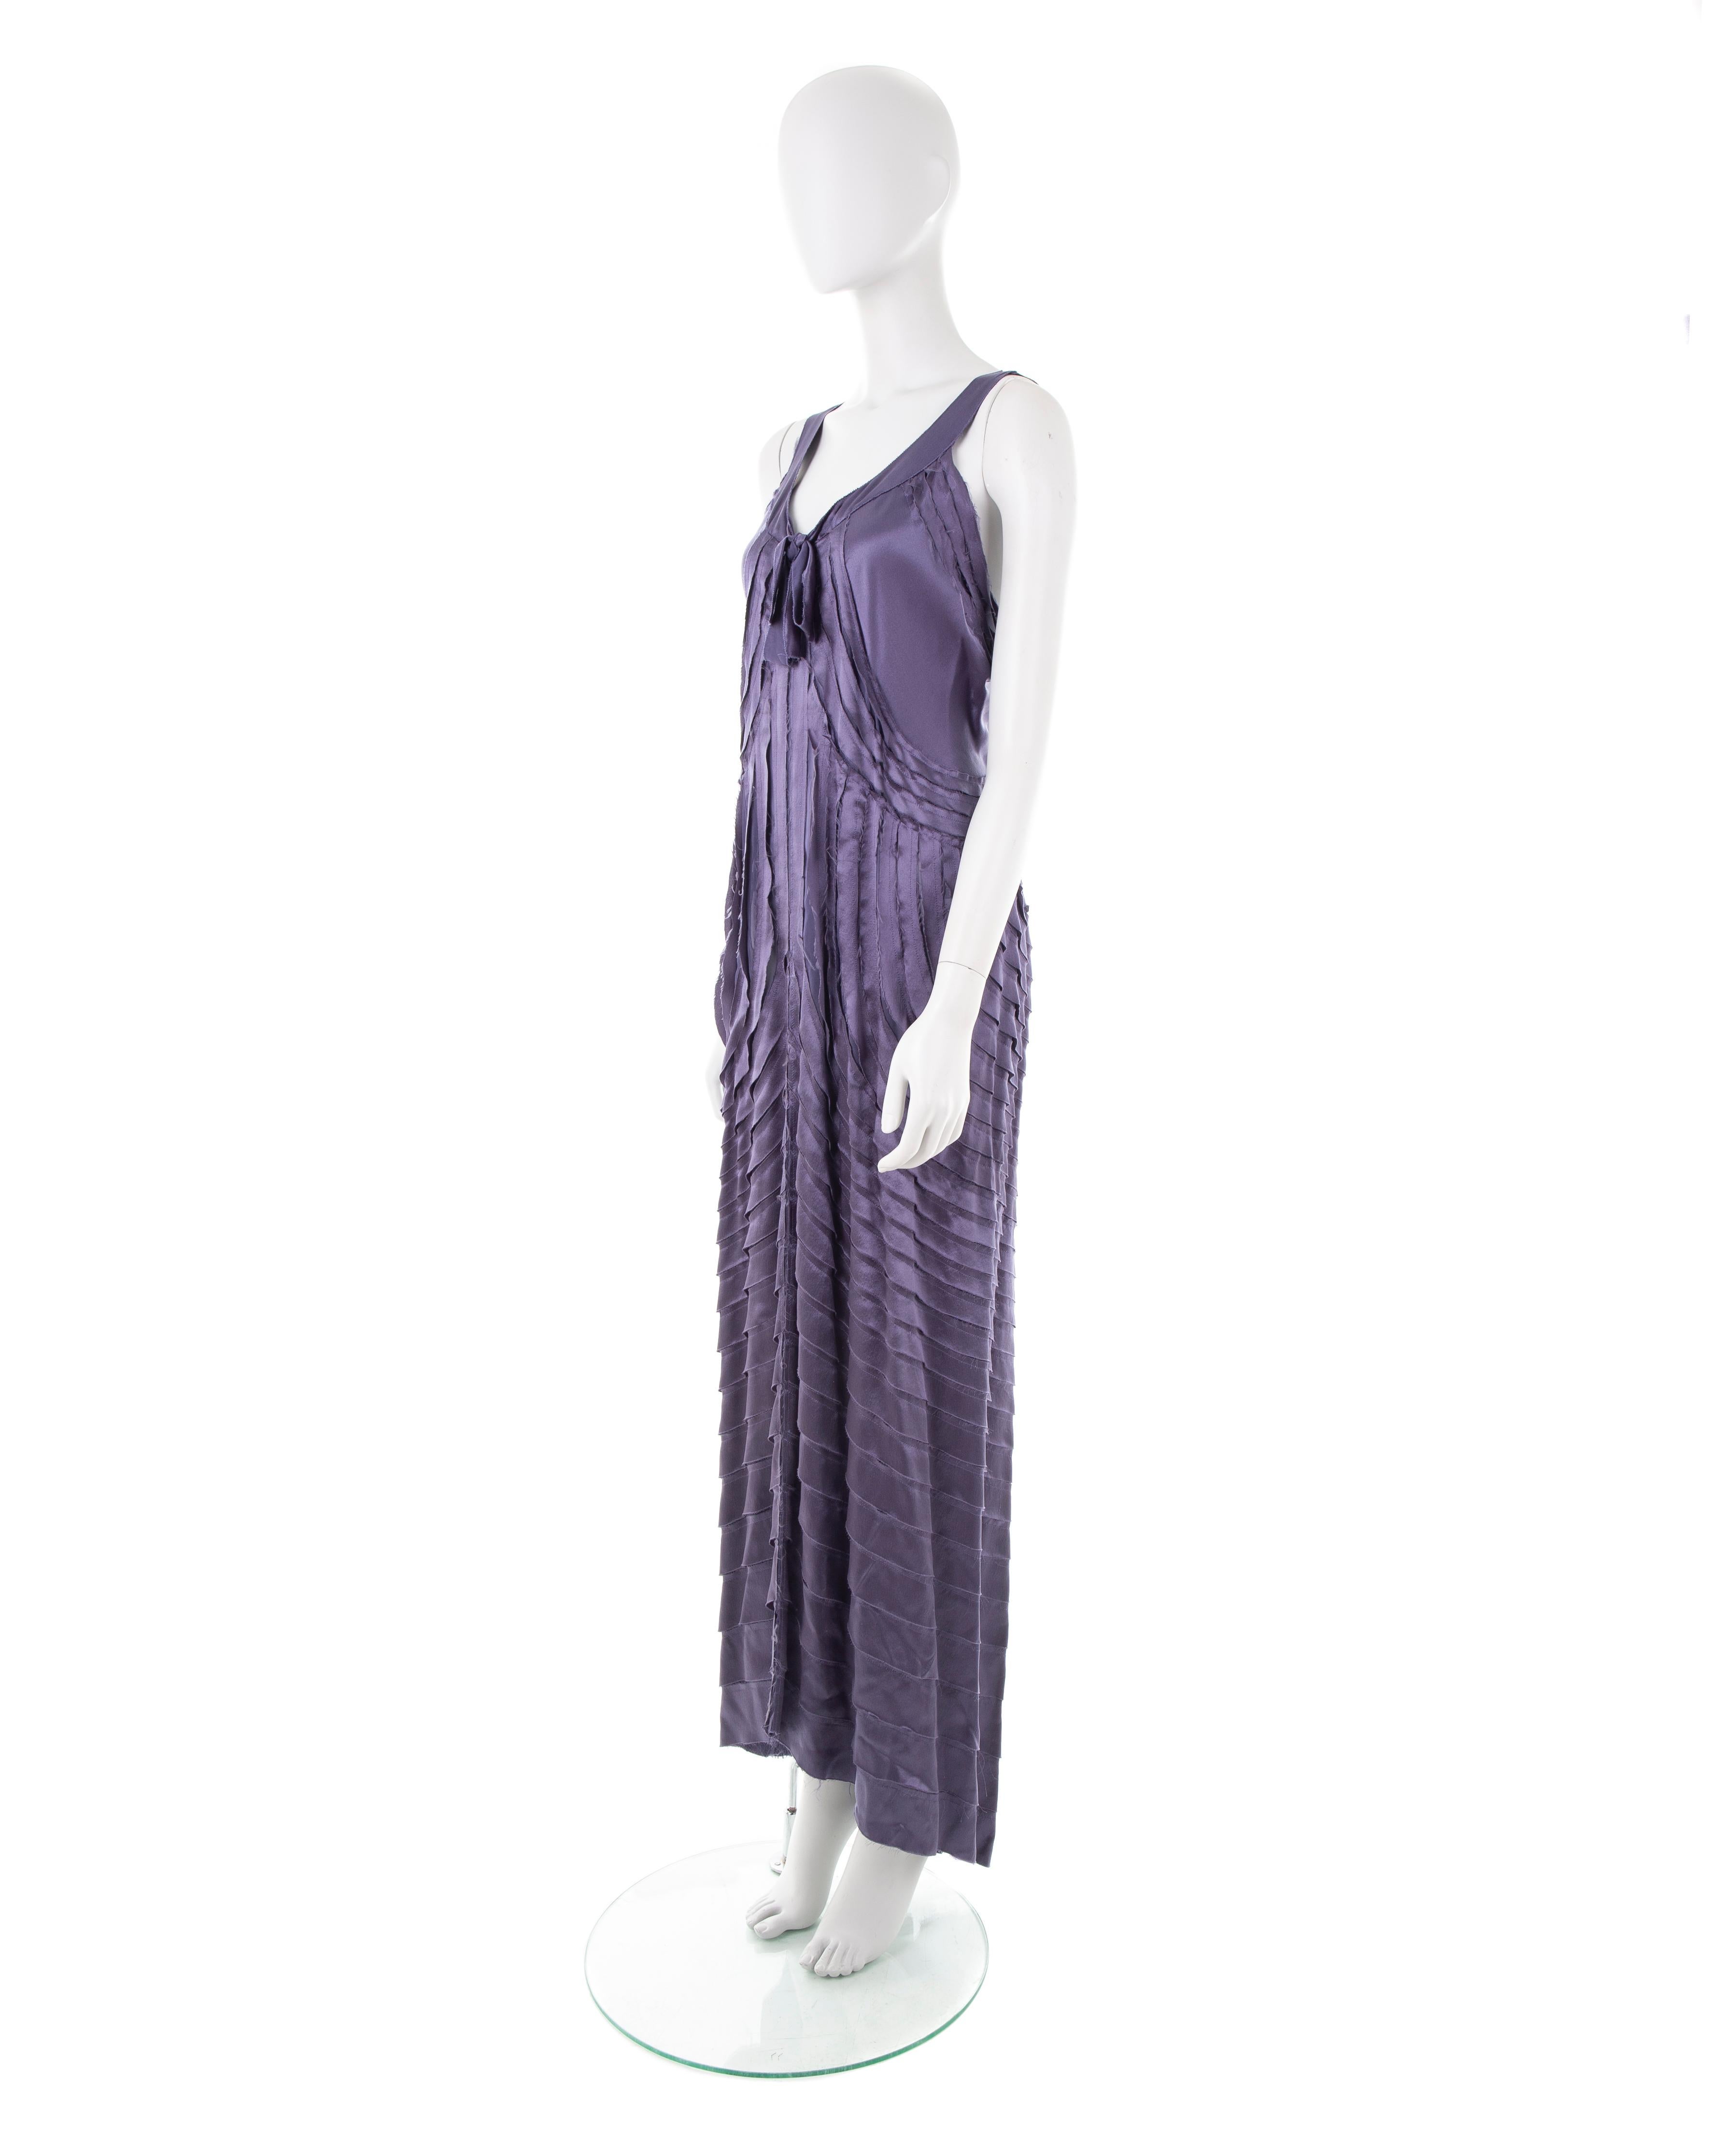 - Purple long evening dress
- Tie bow collar
- Patterned raw-edge strips